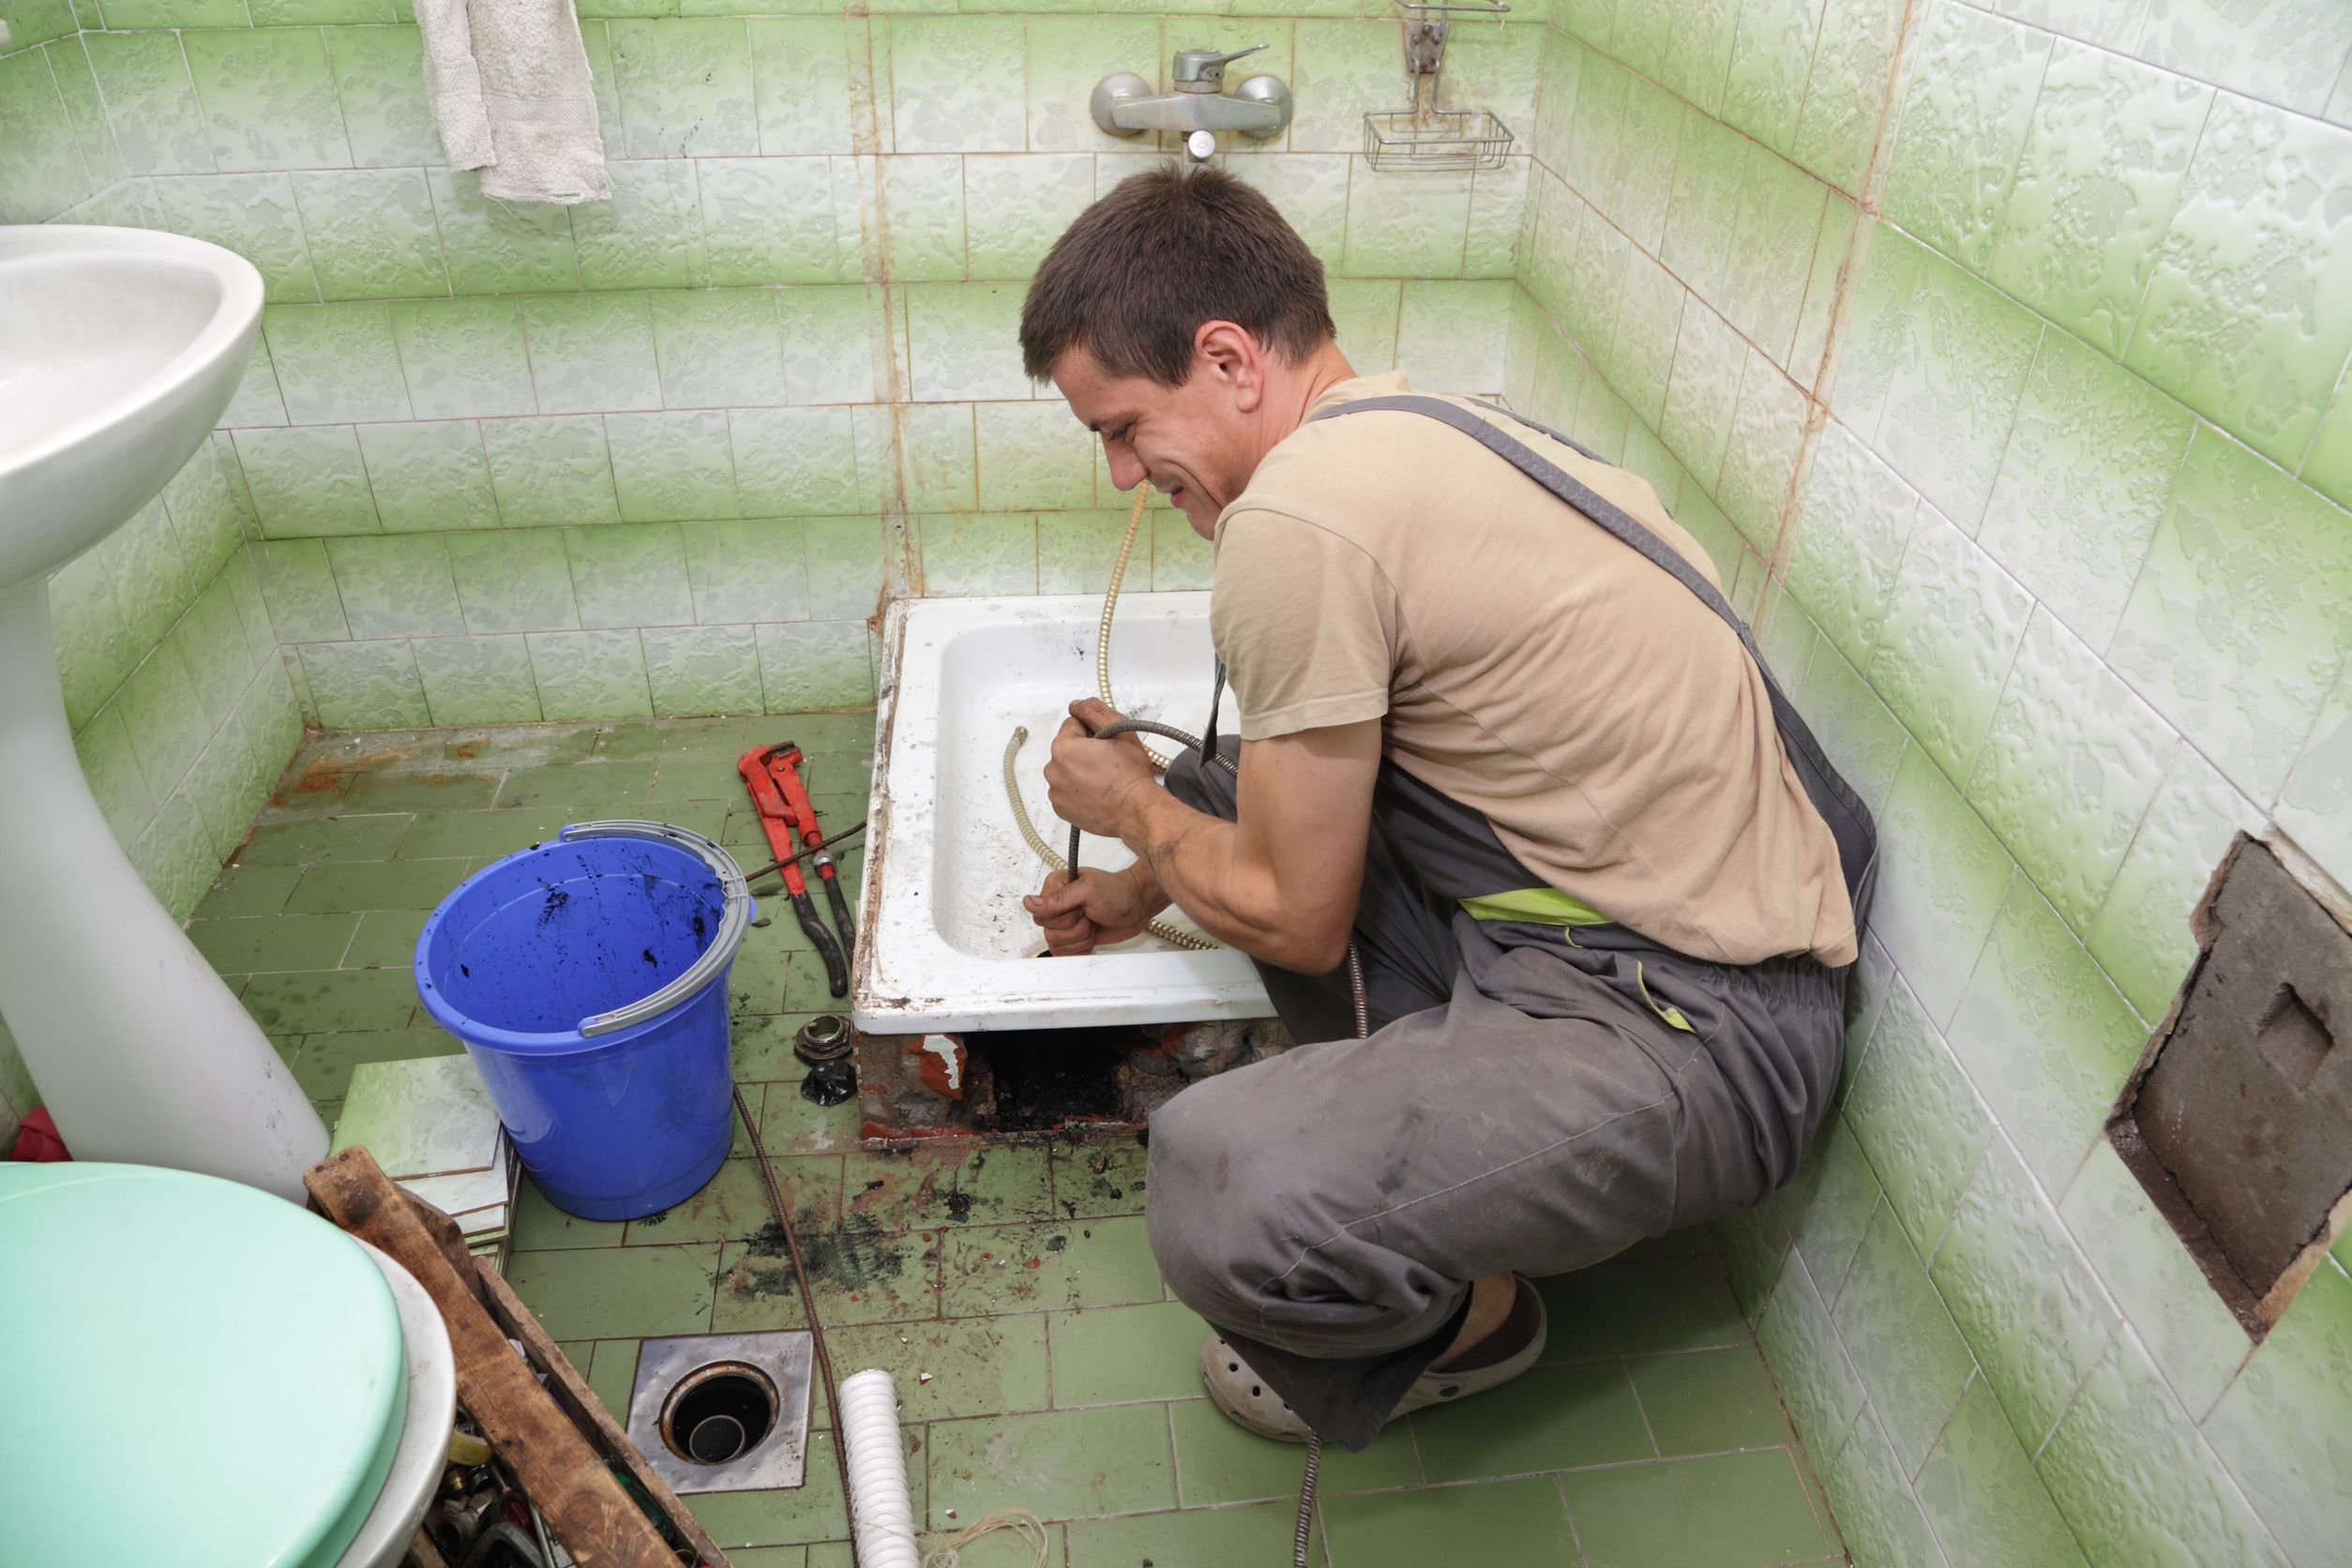 Clogged Toilet? You Need Residential Plumbing Repairs In West Chester, OH